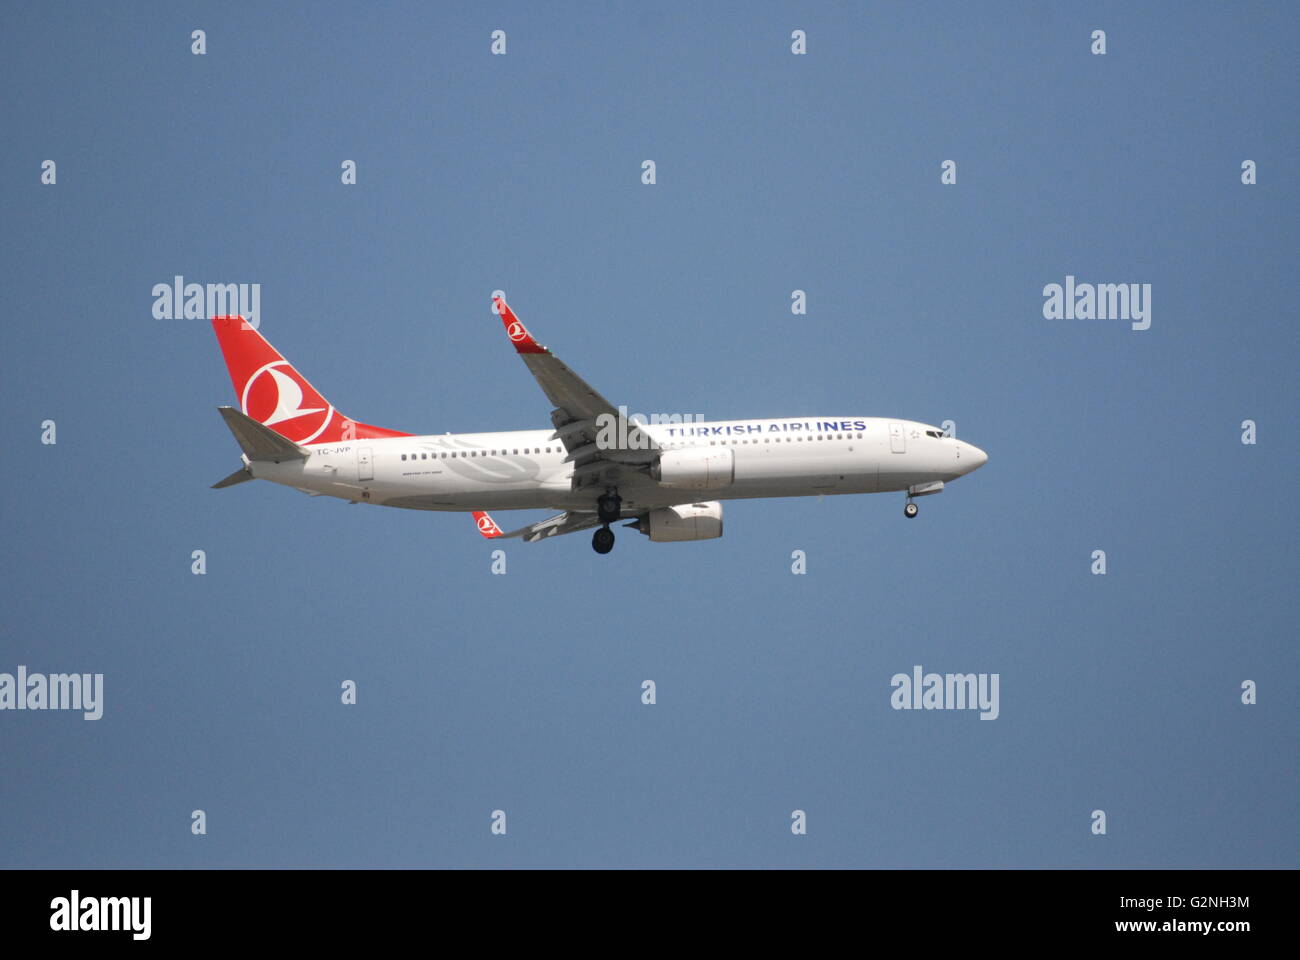 Turkish Airlines' Boeing 737-800 aircraft during the approach to Adnan Menderes Airport Stock Photo